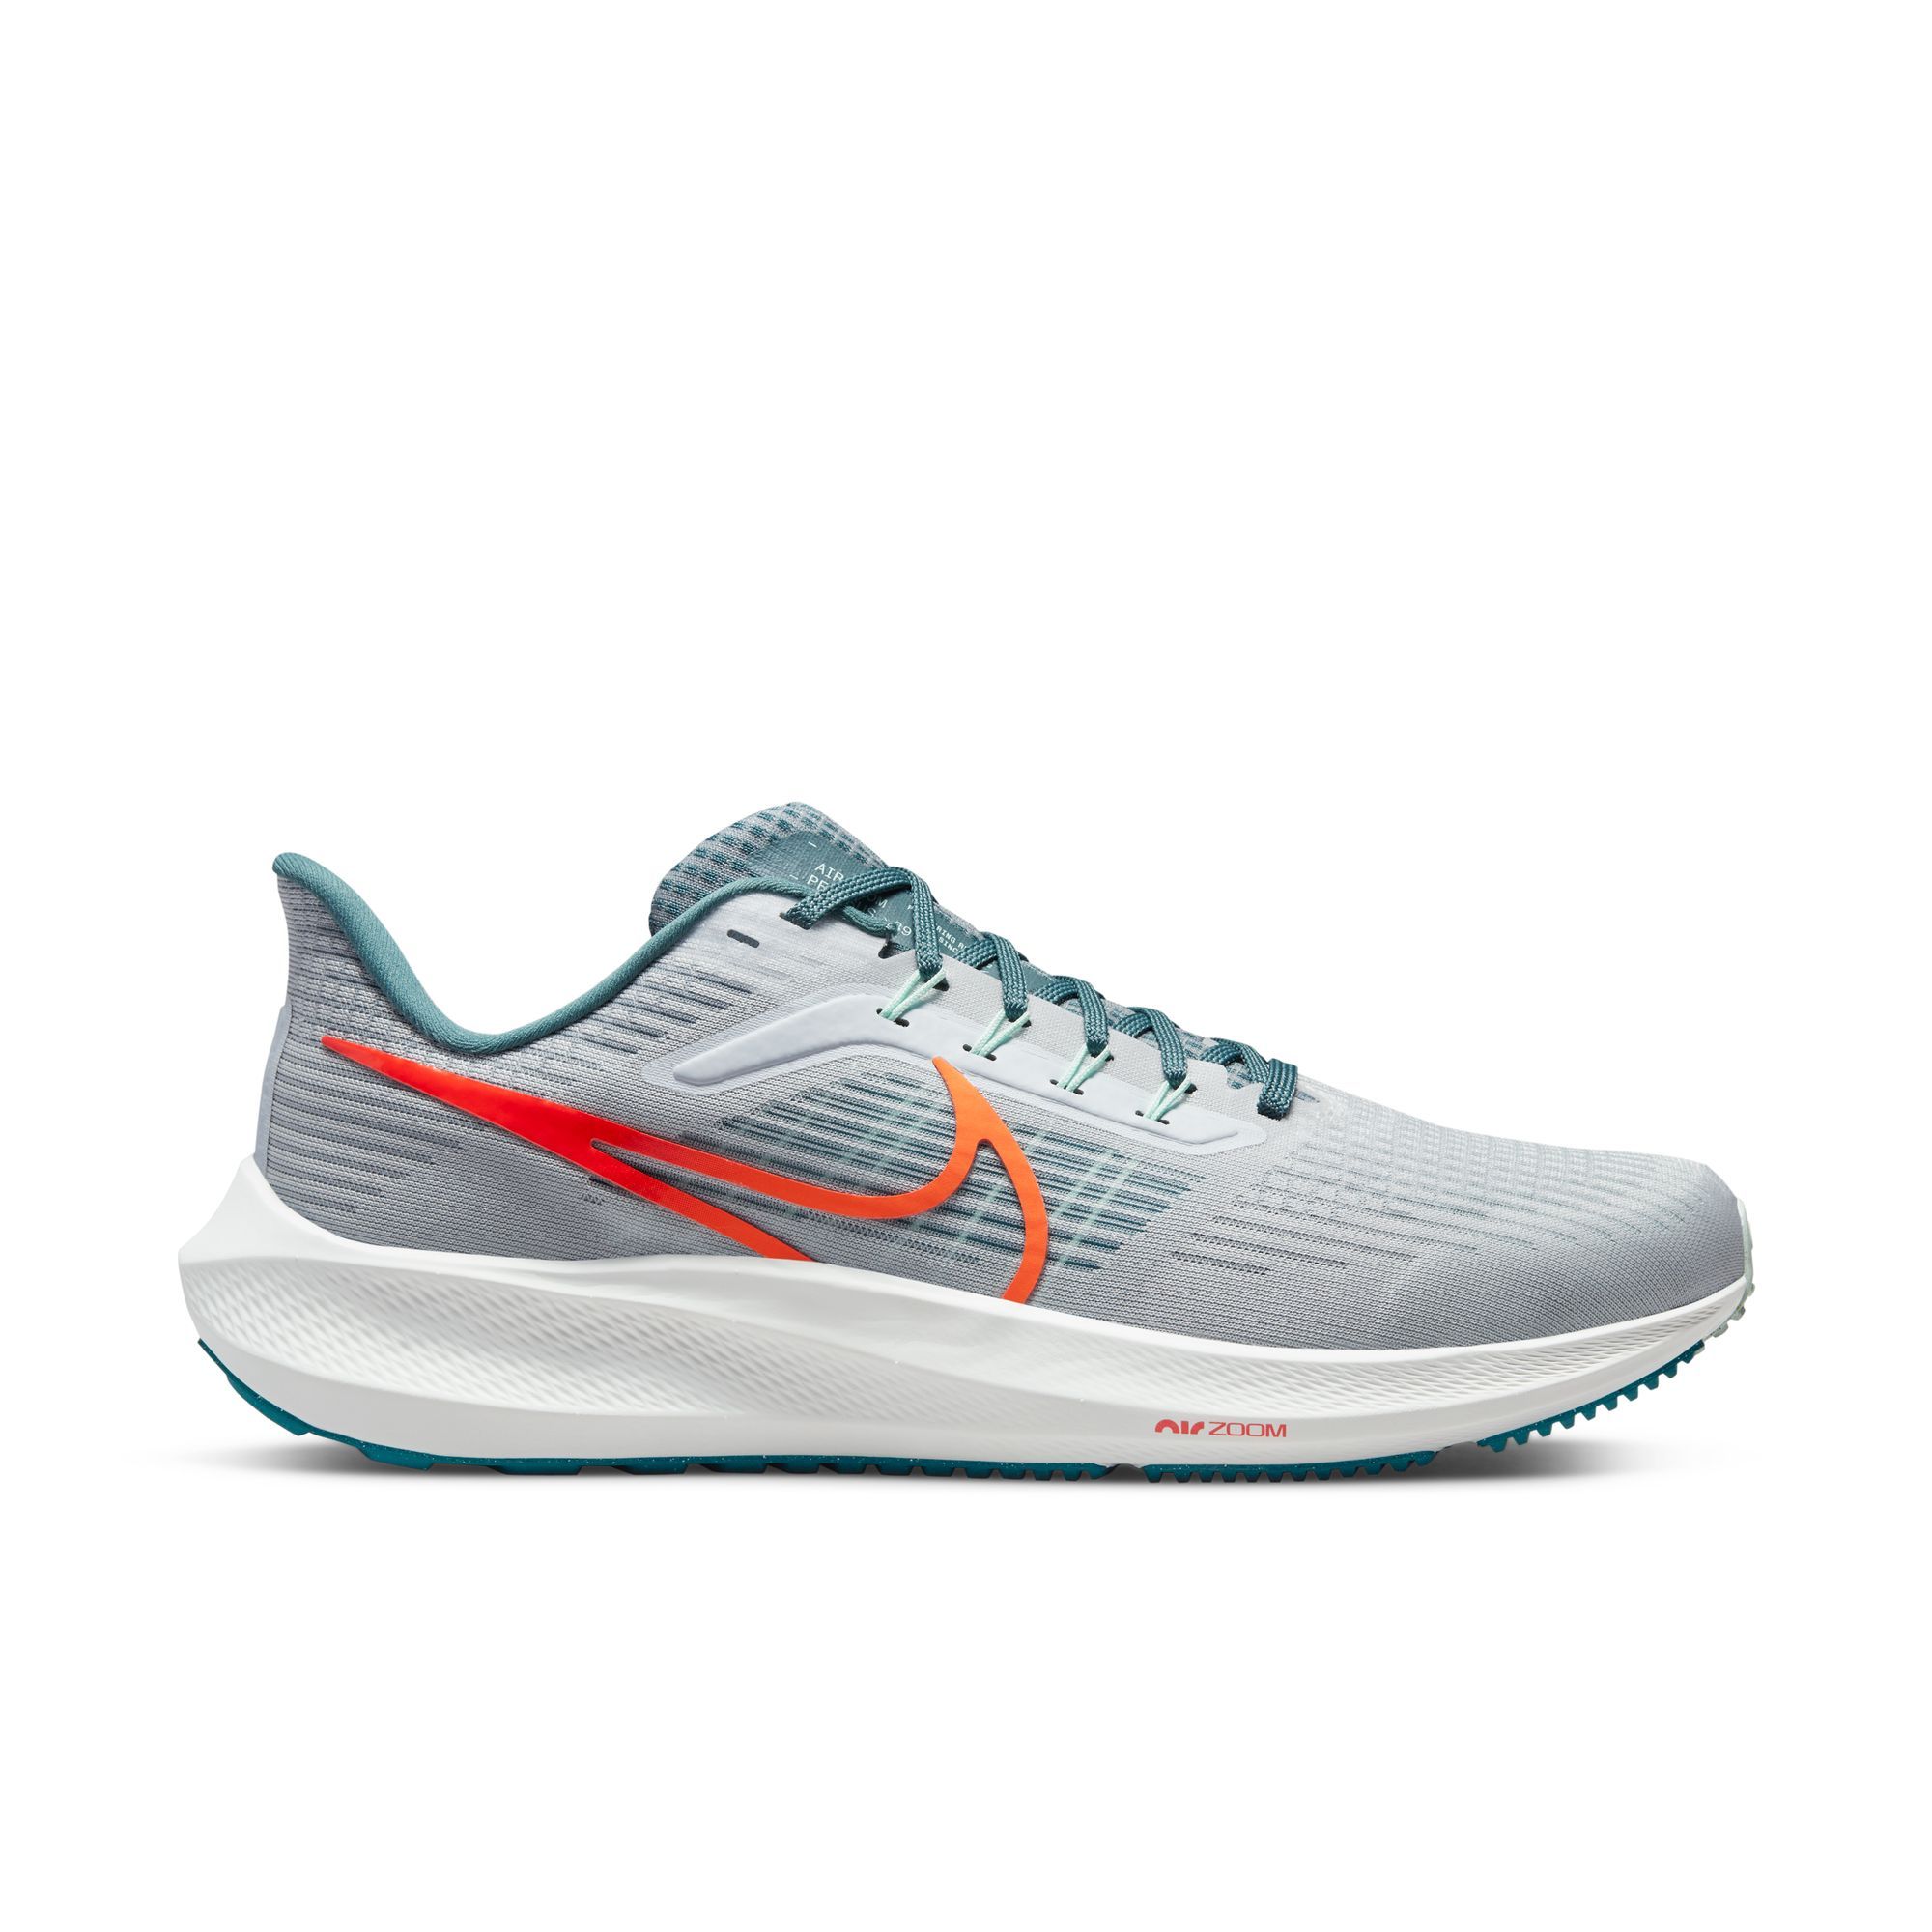 Nike Air Zoom 39 hombre para correr marca Nike Referencia : DH4071-003 - prochampions